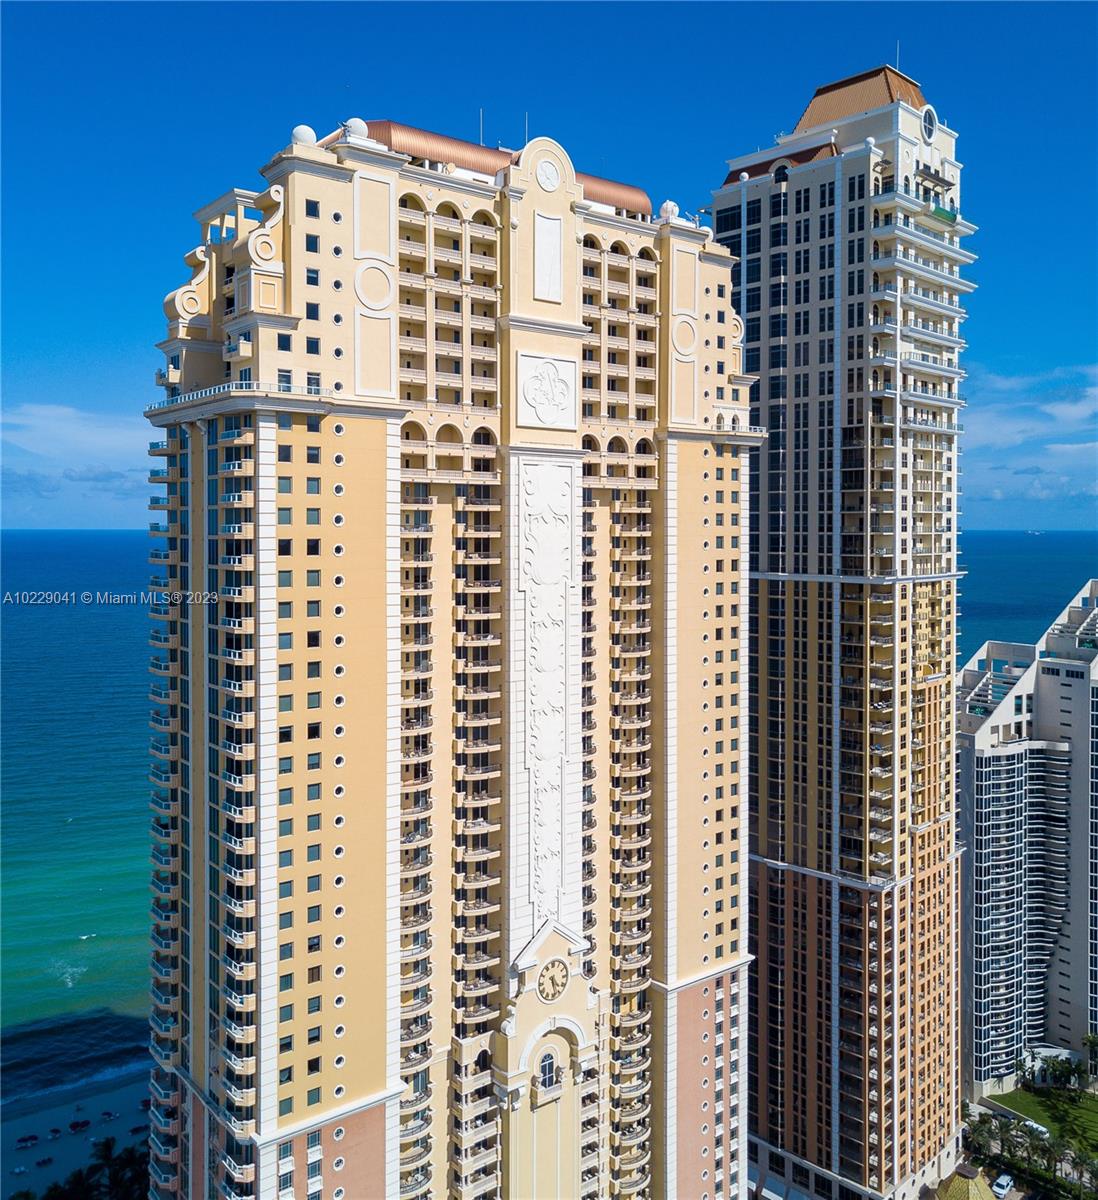 Magnificent, one of a kind unit at ACQUALINA RESORT. This 3 bedroom, 3 bath masterpiece was professionally designed to perfection. Marble floors throughout, Amazing ocean and city views. Fully and tastefully furnished unit. Full service building offers World class Gym; 4 Pools, Concierge, Valet, Spa, Restaurants.